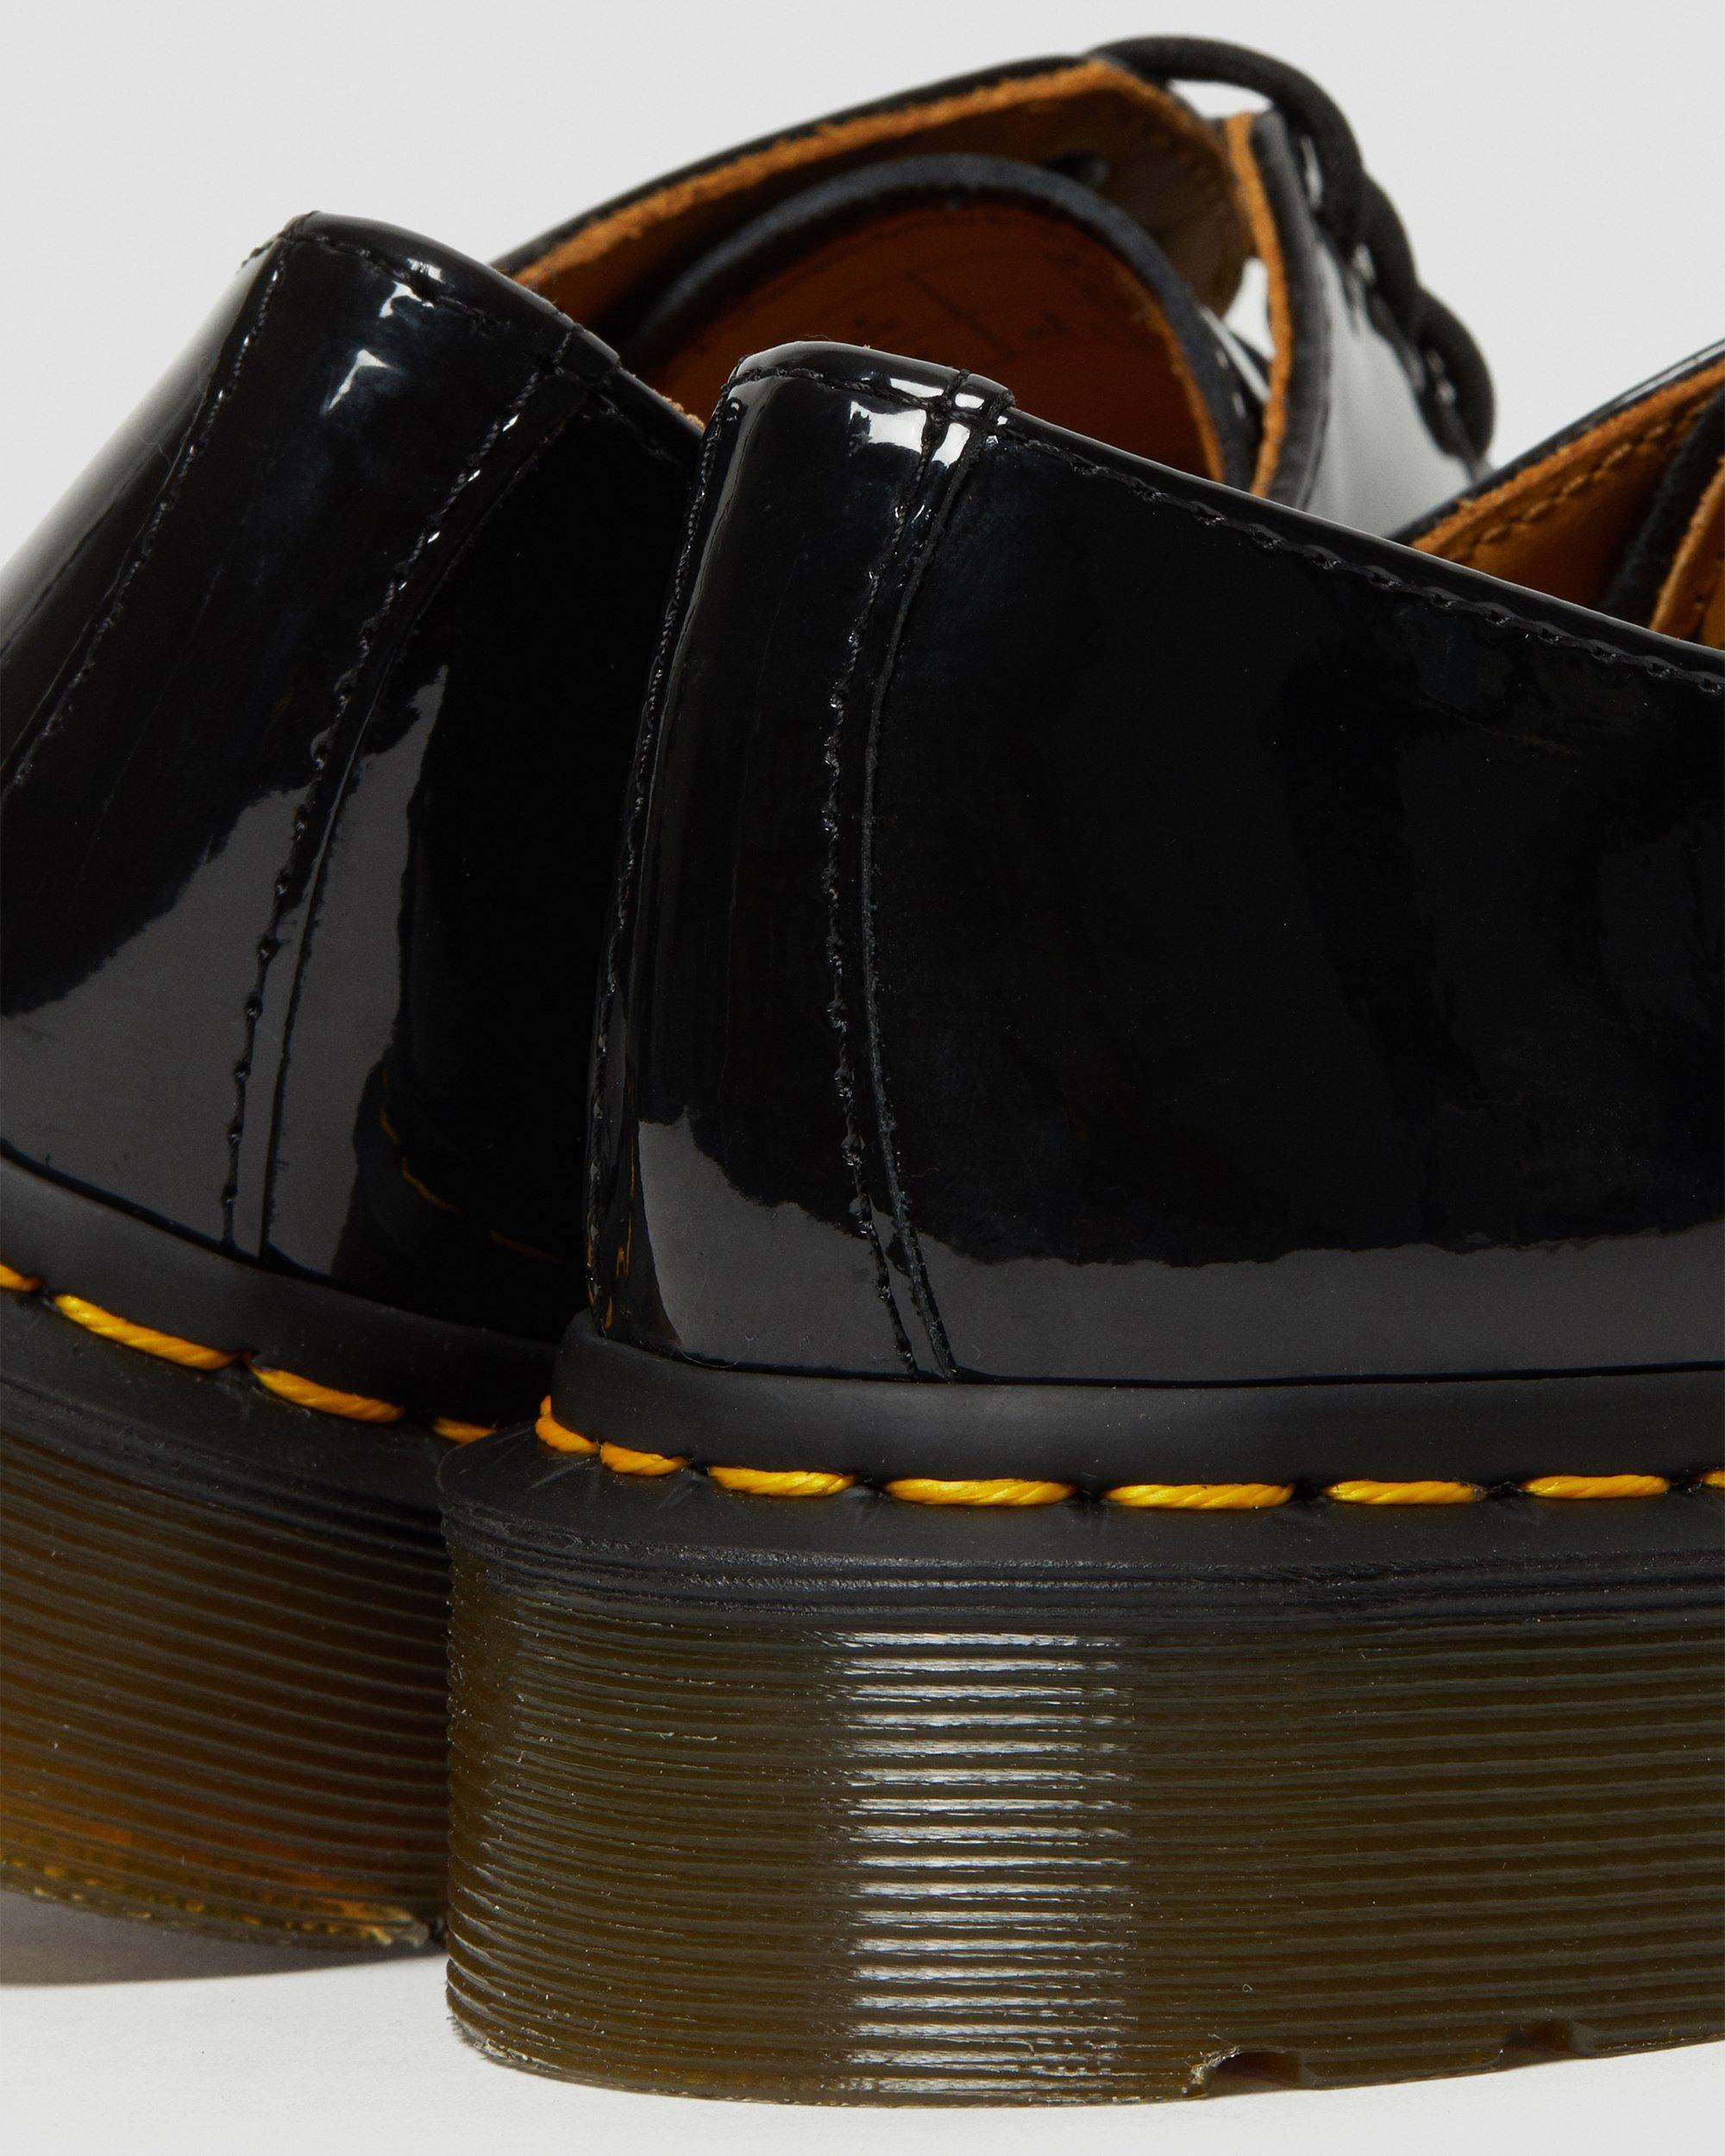 1461 Women's Patent Leather Oxford Shoes | Dr. Martens